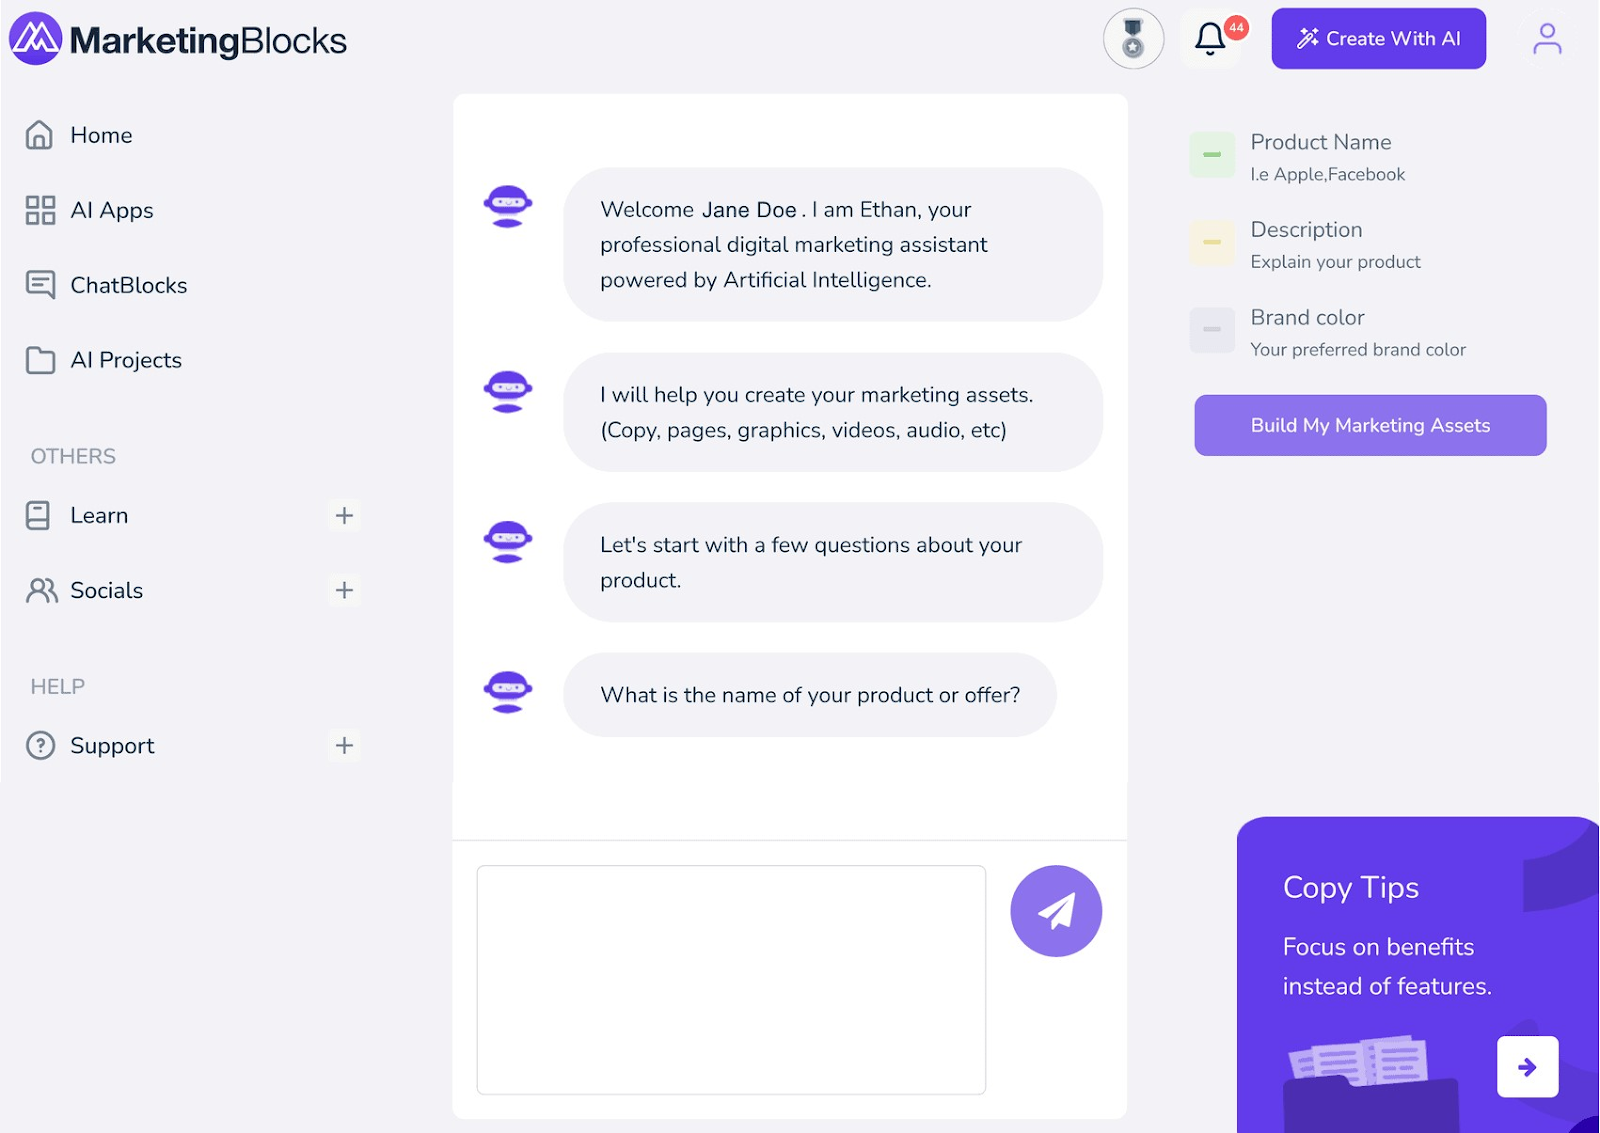 MarketingBlocks's chat with AI assistant Ethan